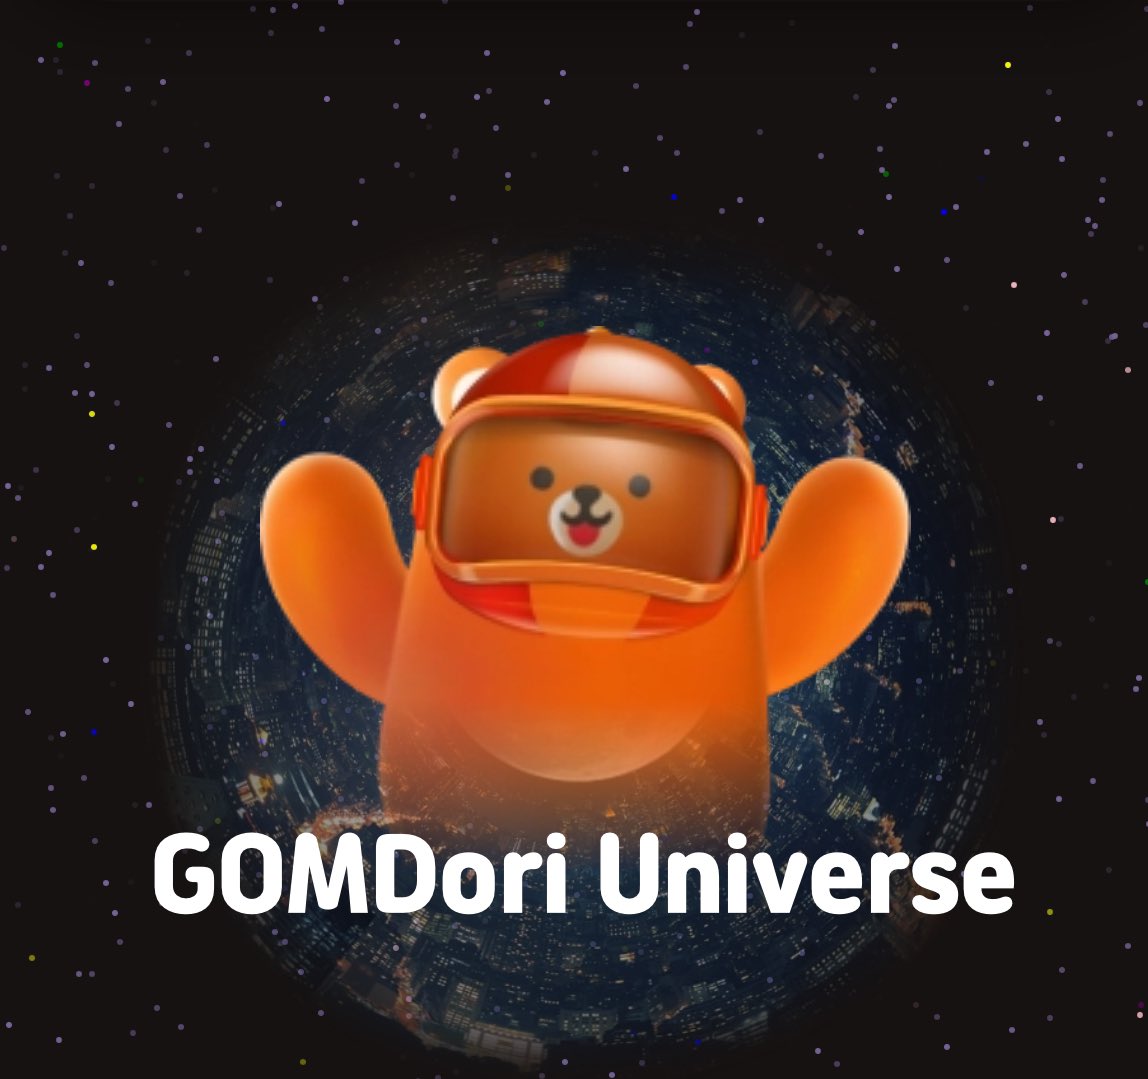 💡GOMD ABOUT🔦 If you are curious about the GOMDori Universe & Crew of the $GOMD project, please visit. gomdori.io/about #GOMDori #Web3 #IT #Innovation